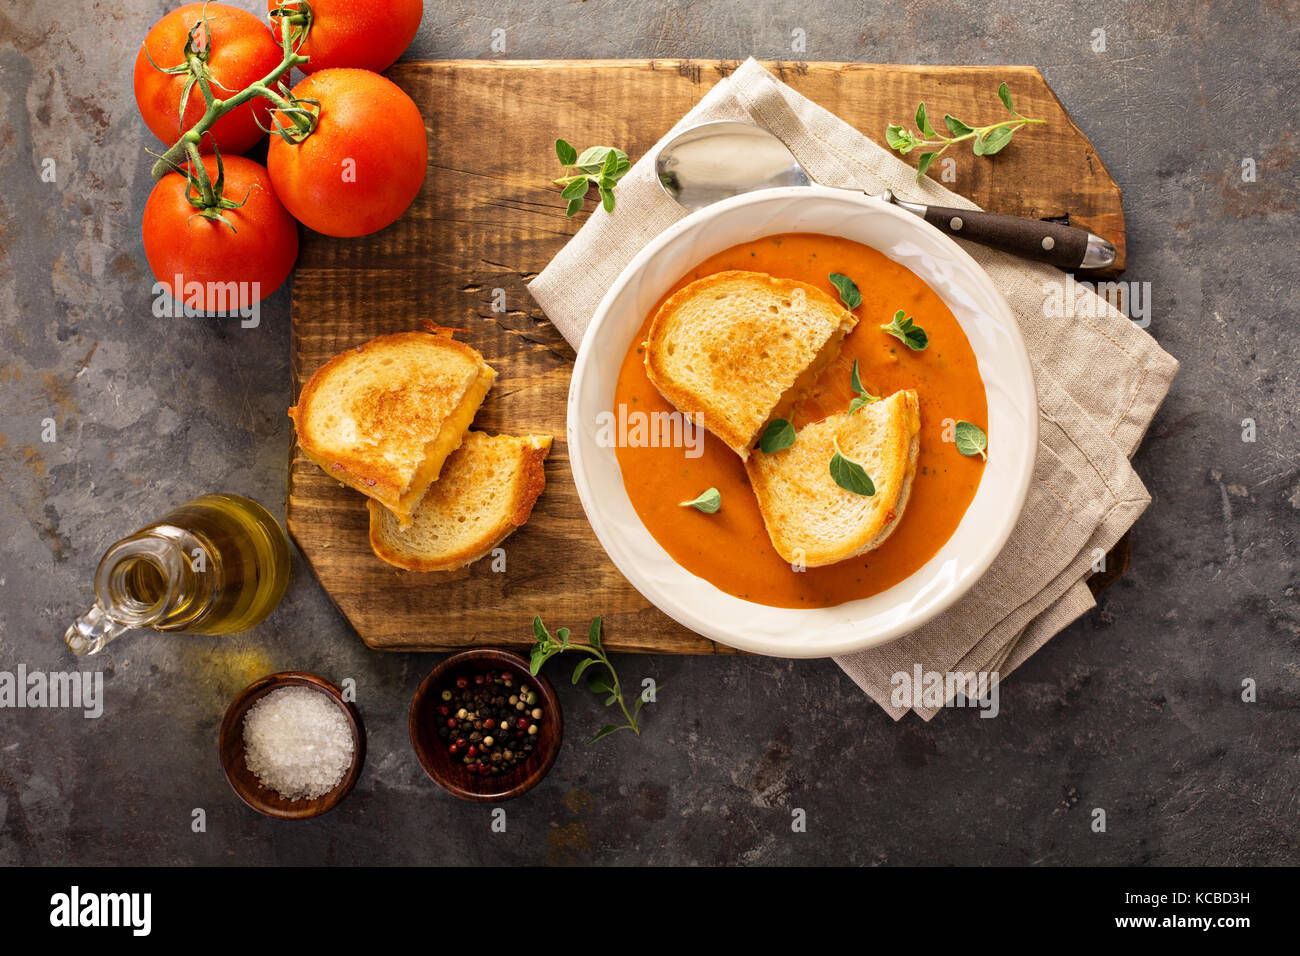 Tomato soup with grilled cheese sandwiches Stock Photo